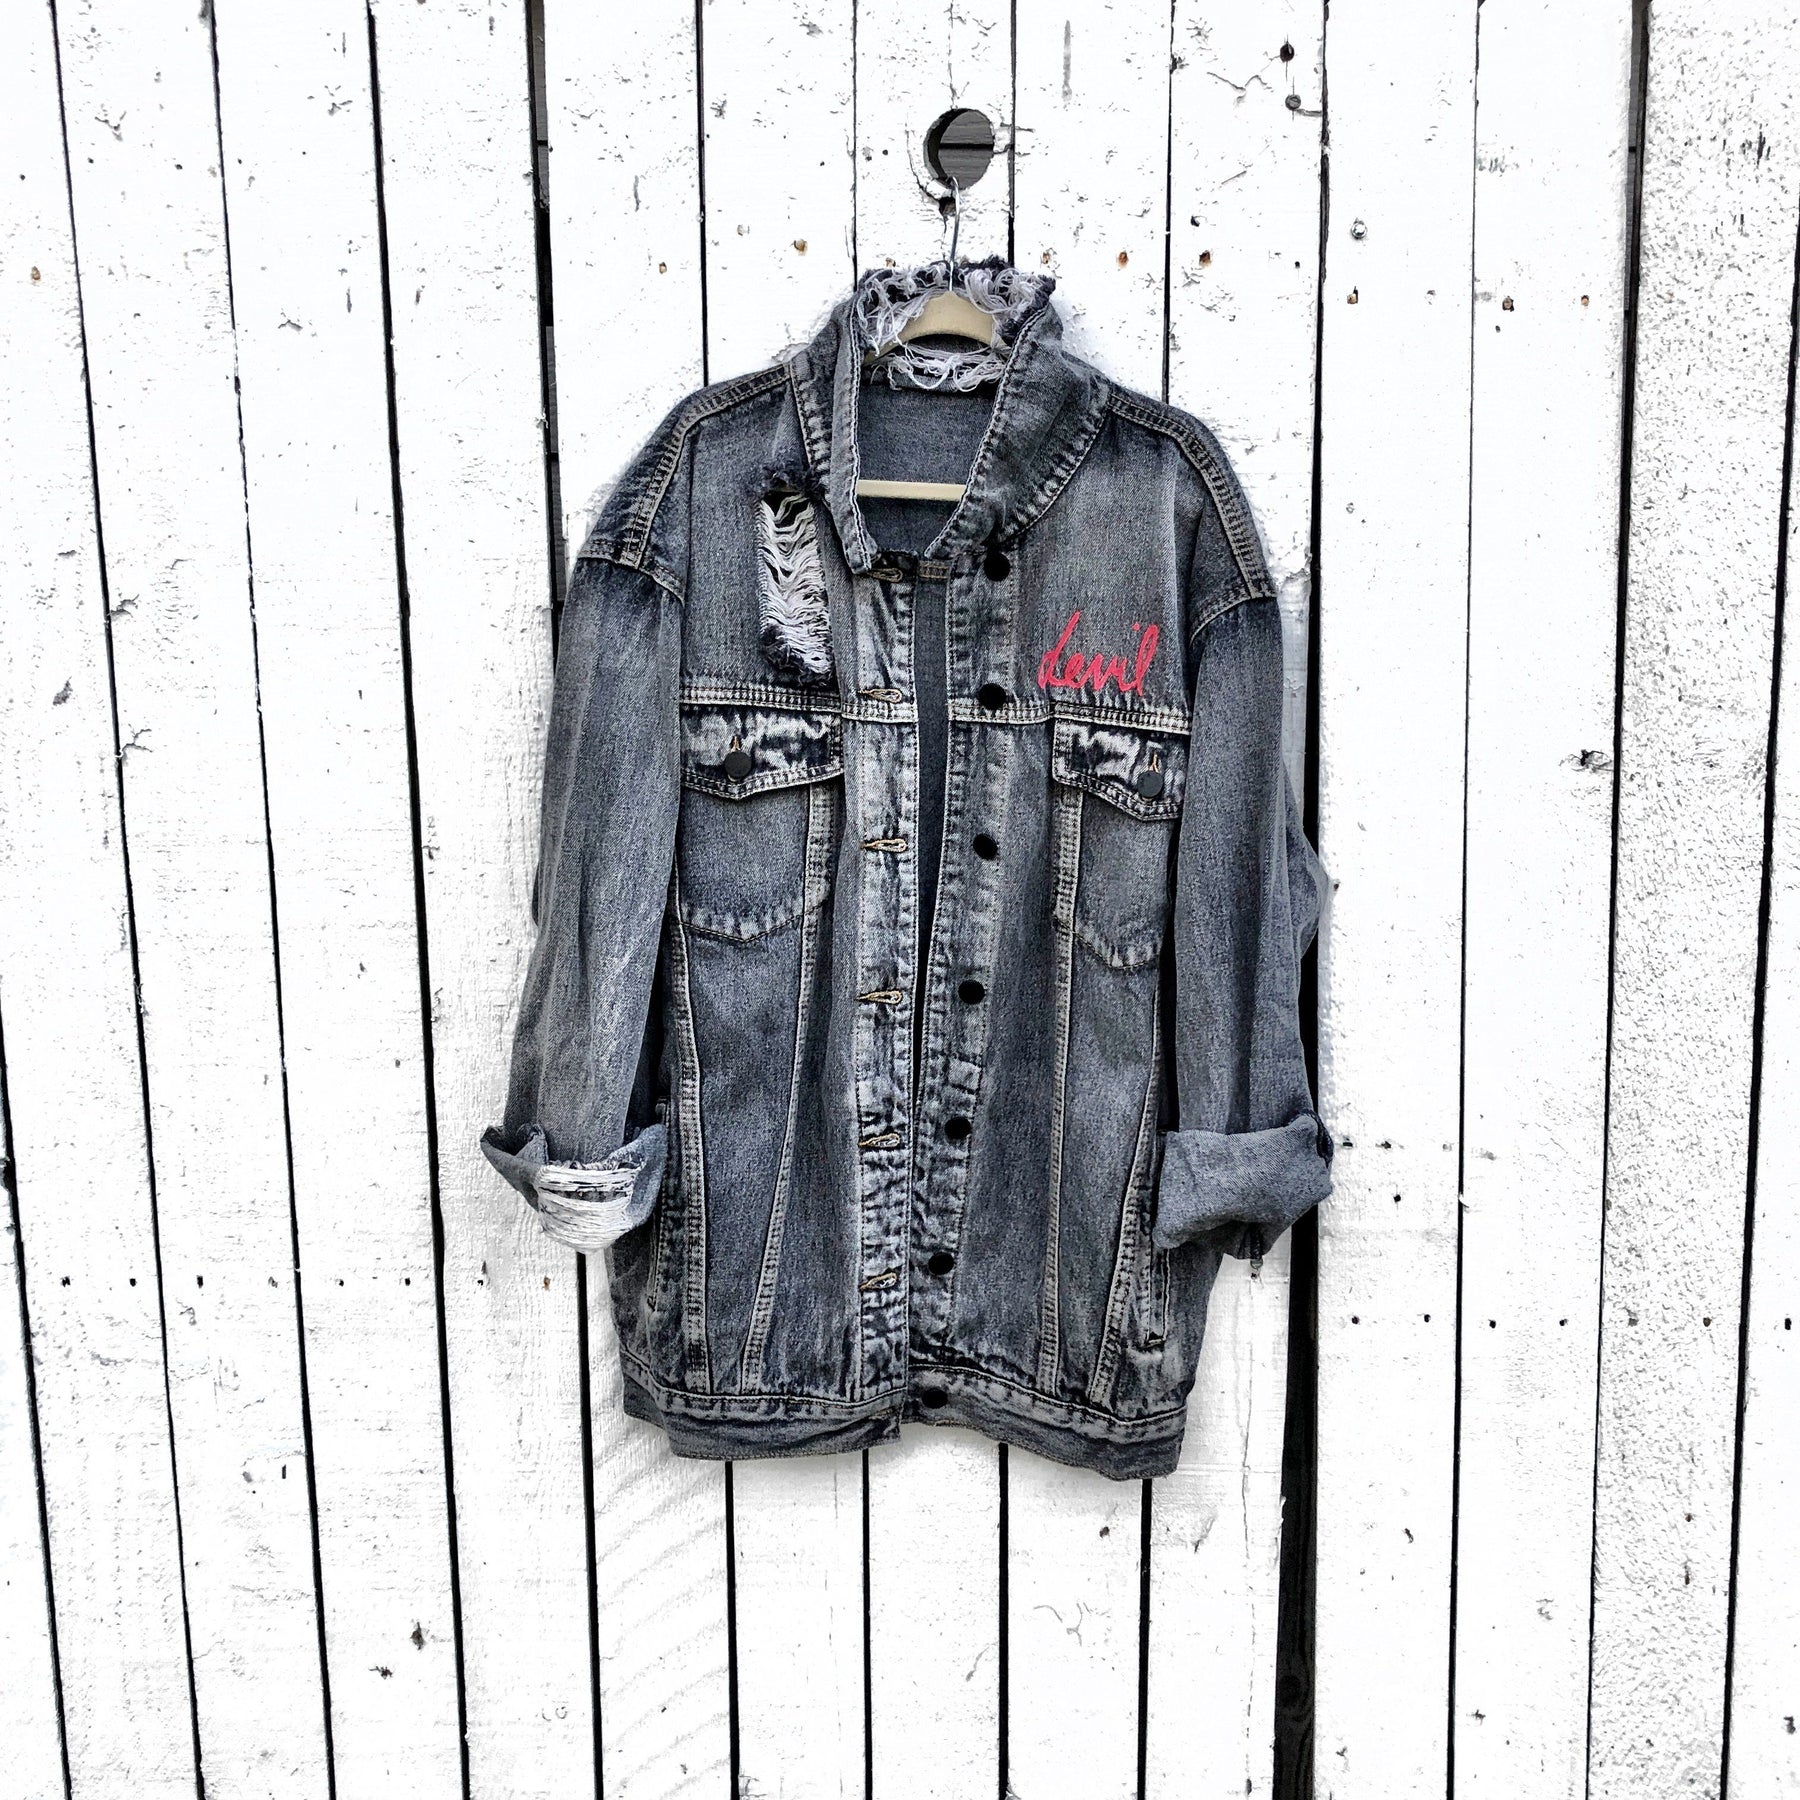 Pin on Painted denim